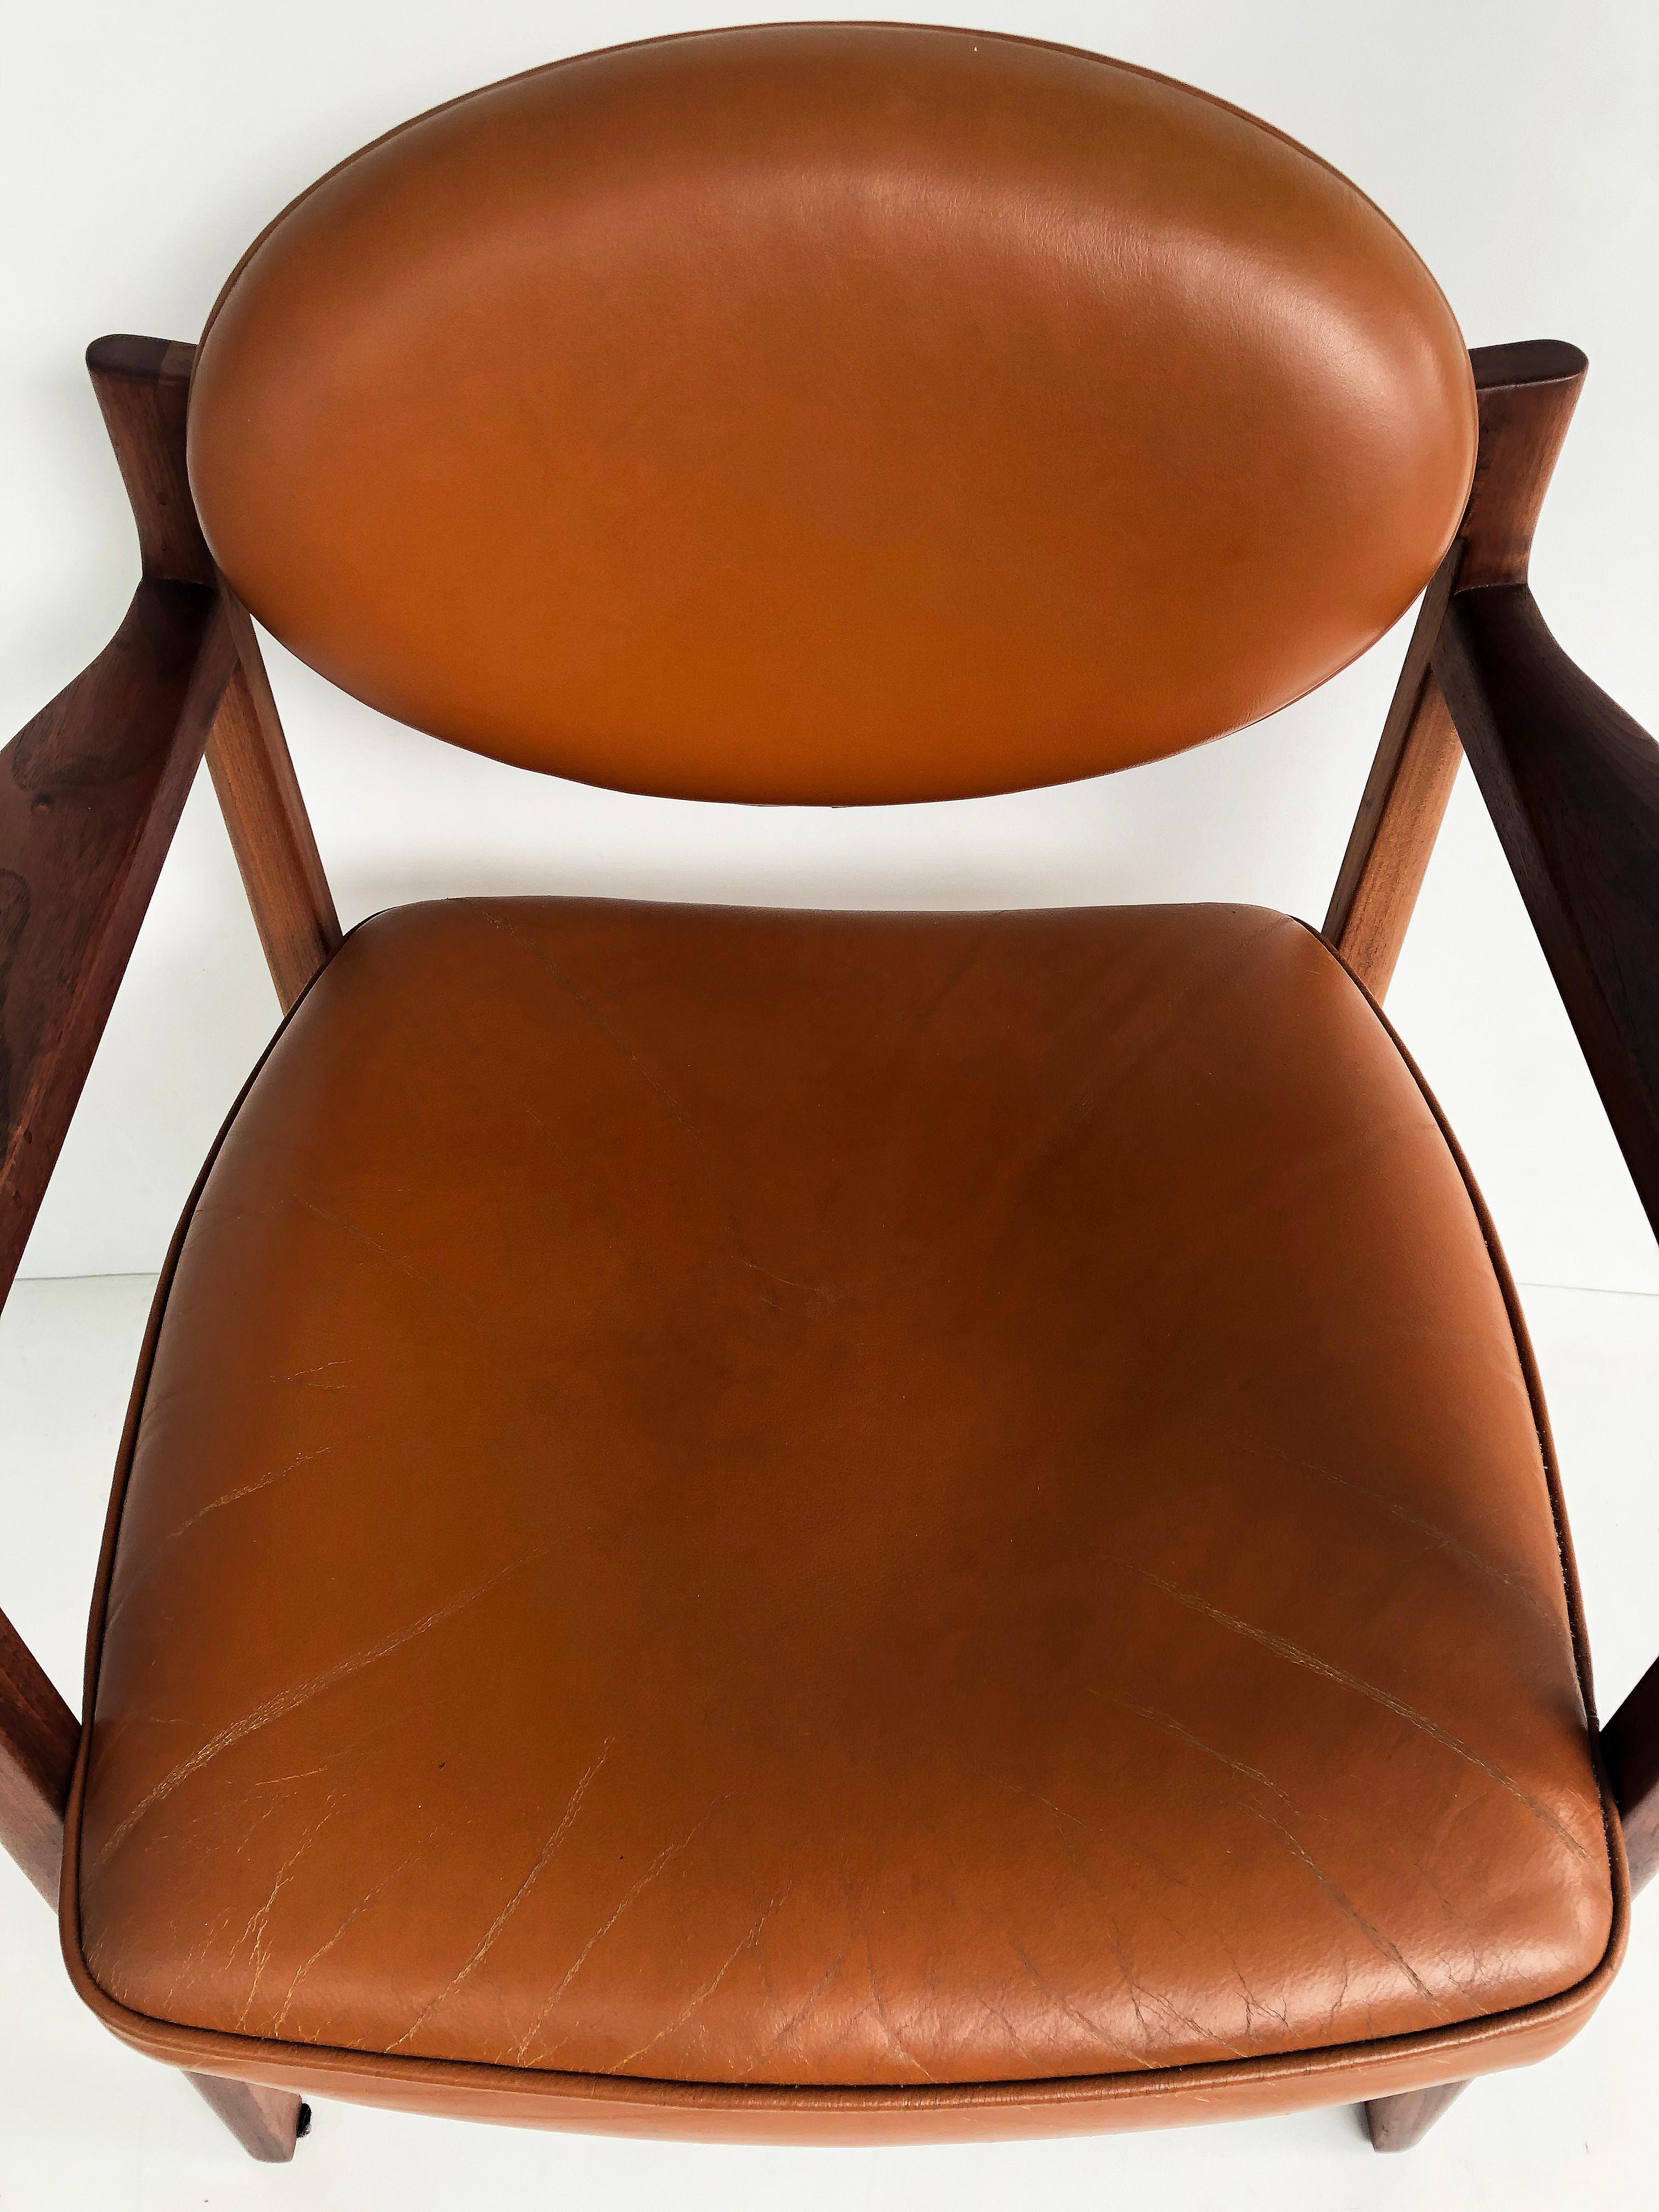 Jens Risom Design Pair of Oiled Walnut & Leather Upholstered Armchairs, c.1965 For Sale 5